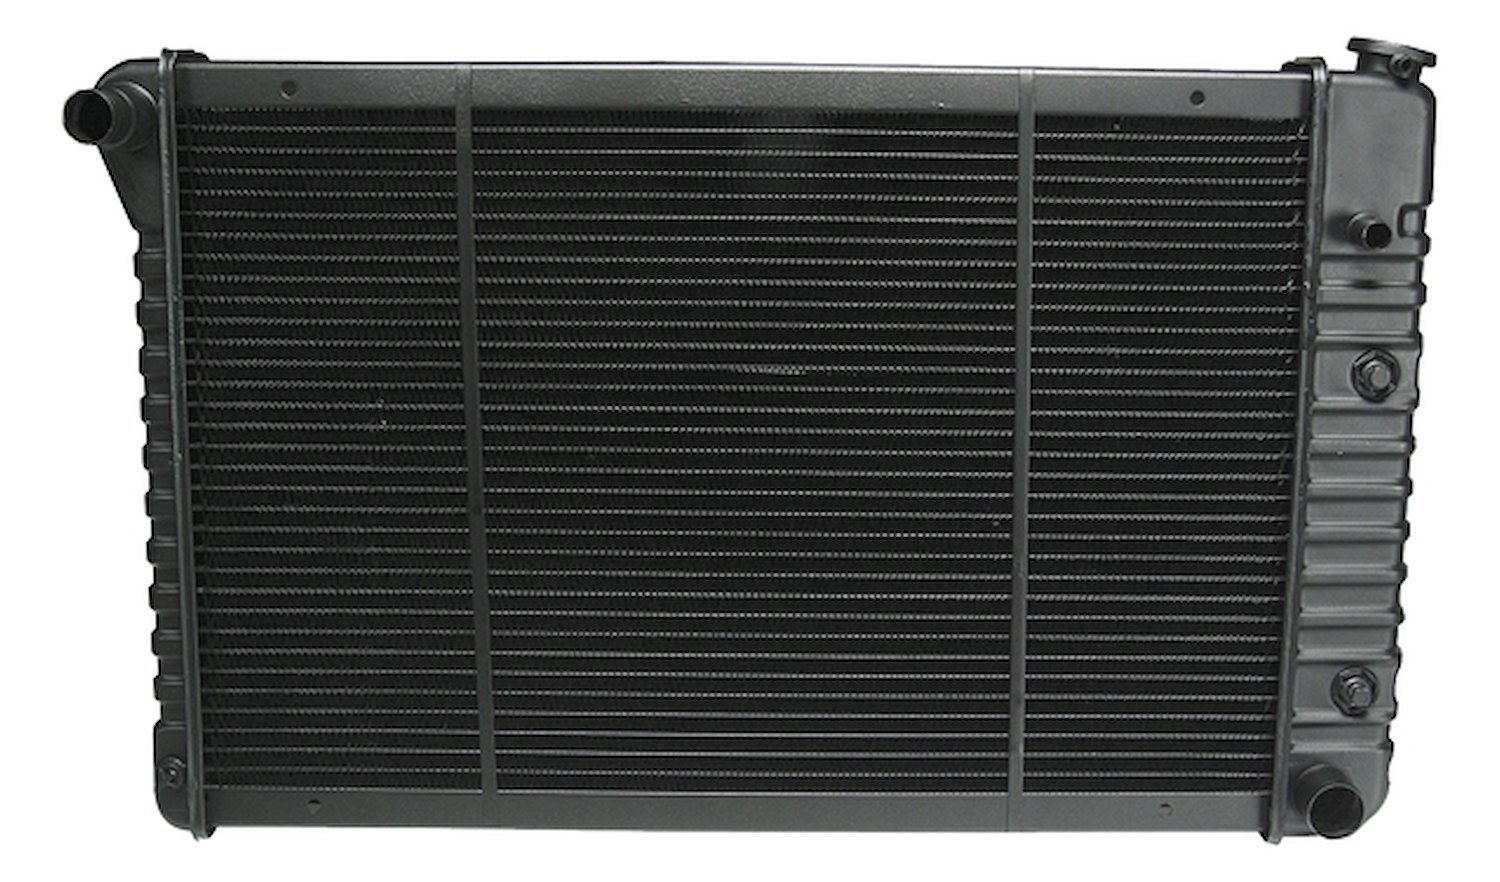 Replacement Radiator for 1973-1980 Chevrolet C10/C20/C30 Truck w/5.0L, 5.7L & 7.4L Eng. [3-Row]